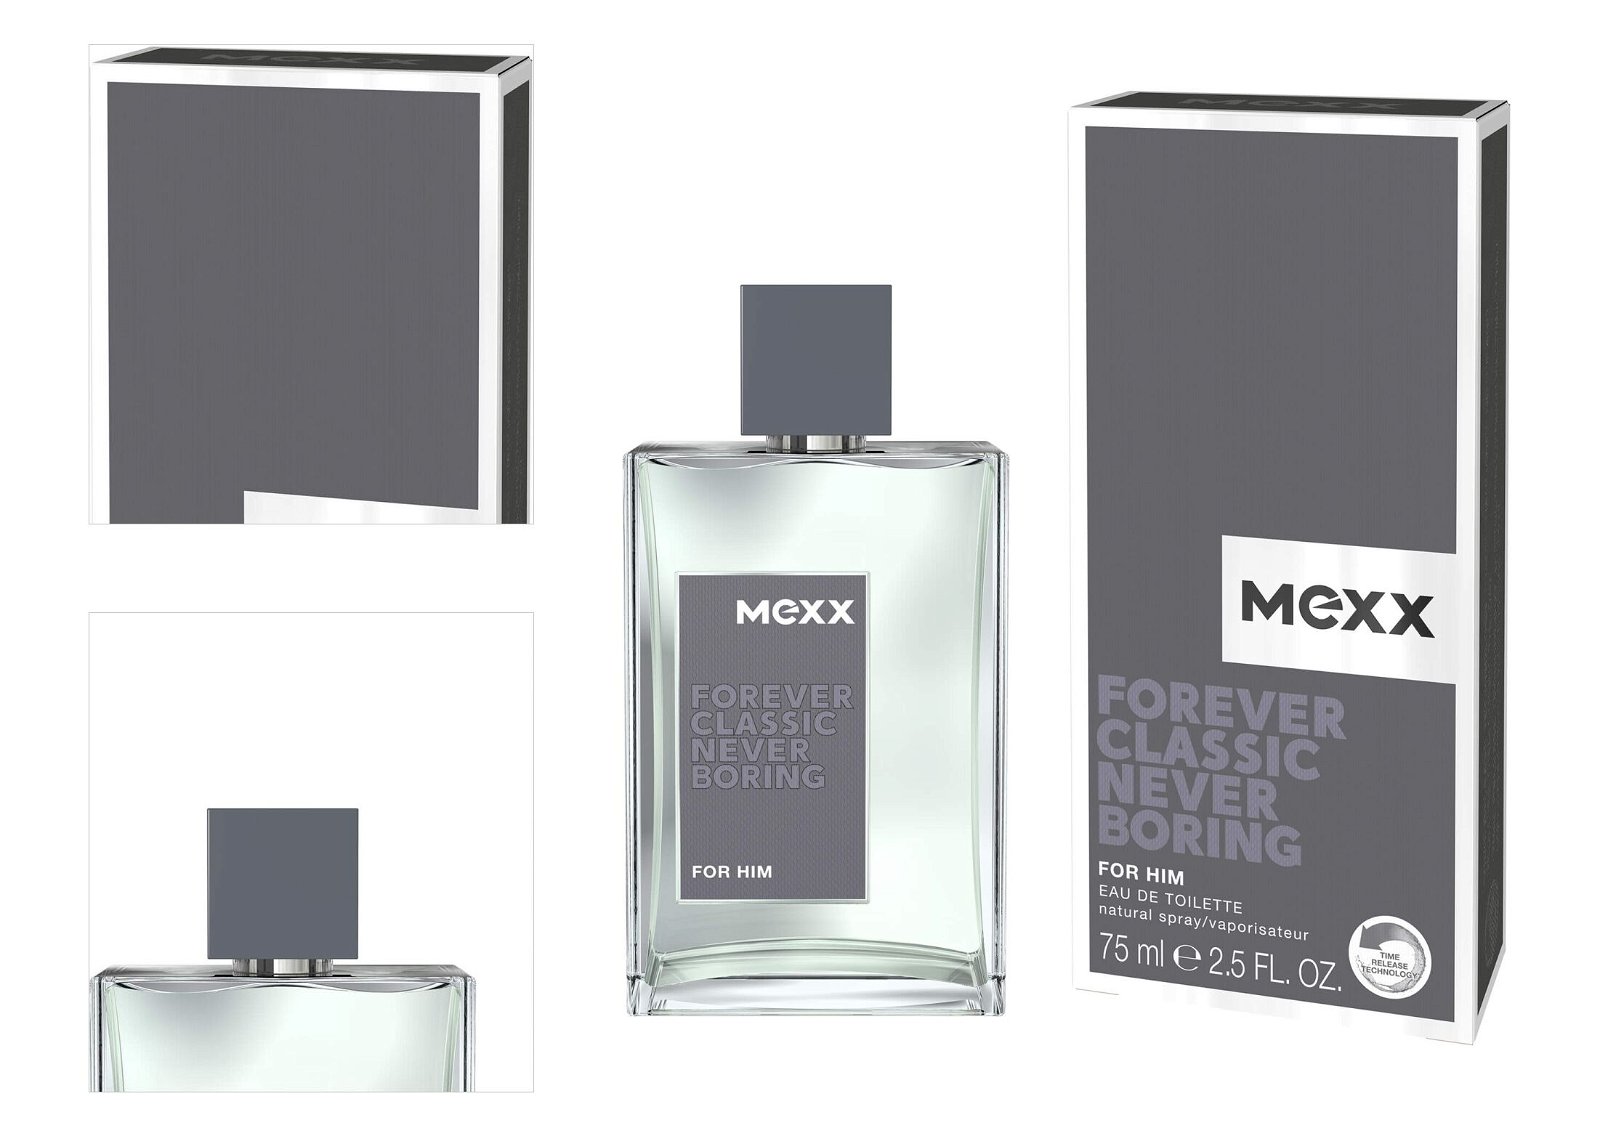 Mexx Forever Classic Never Boring for Him - EDT 50 ml 9